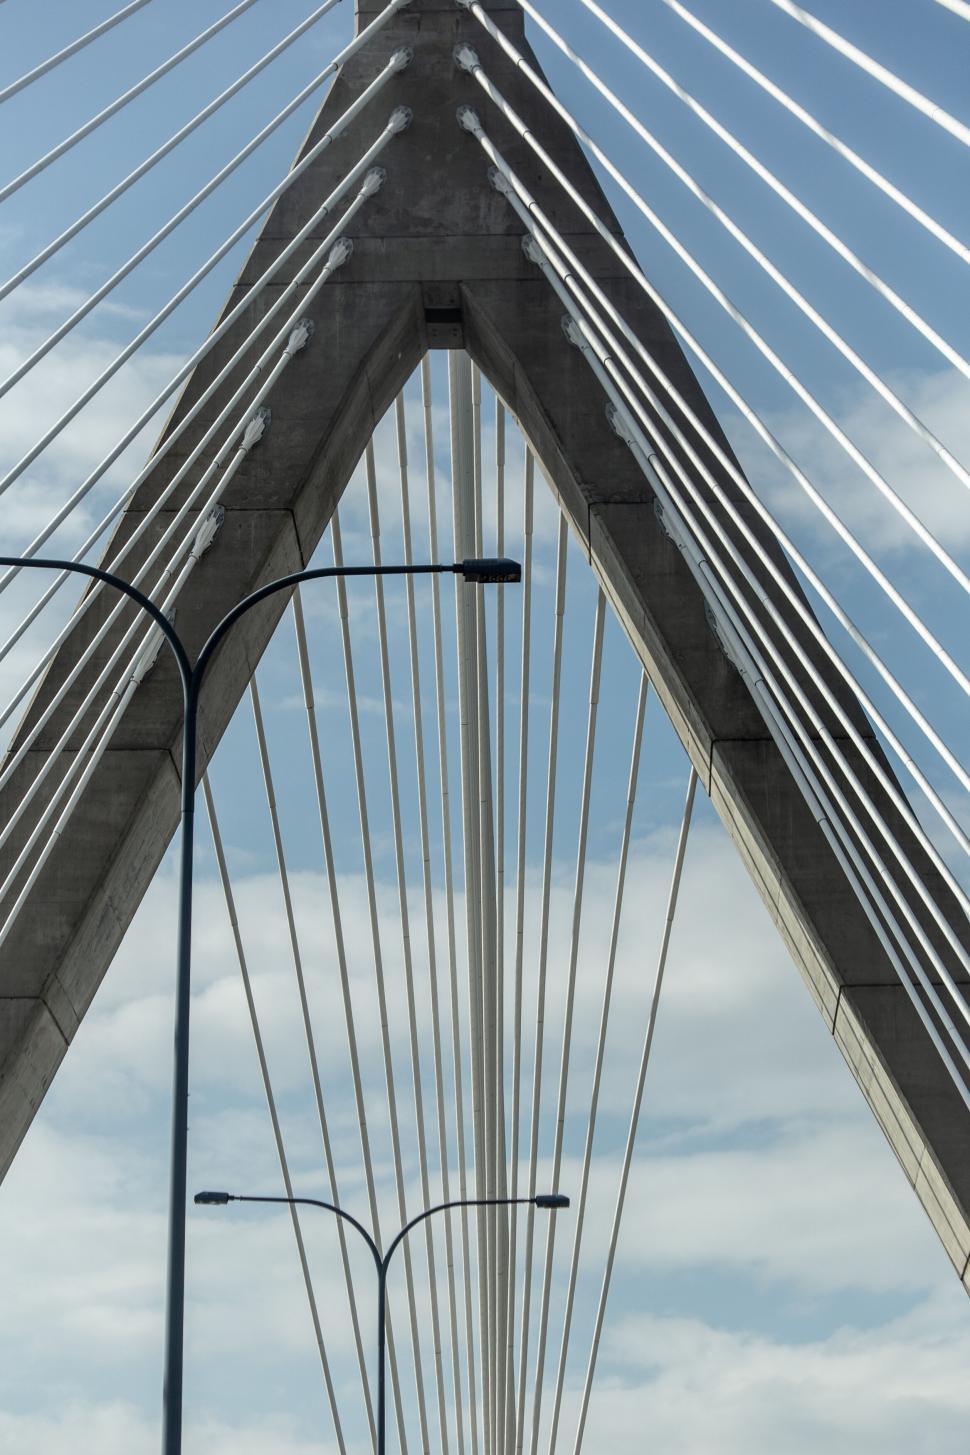 Free Image of Sweeping cables of a modern suspension bridge 